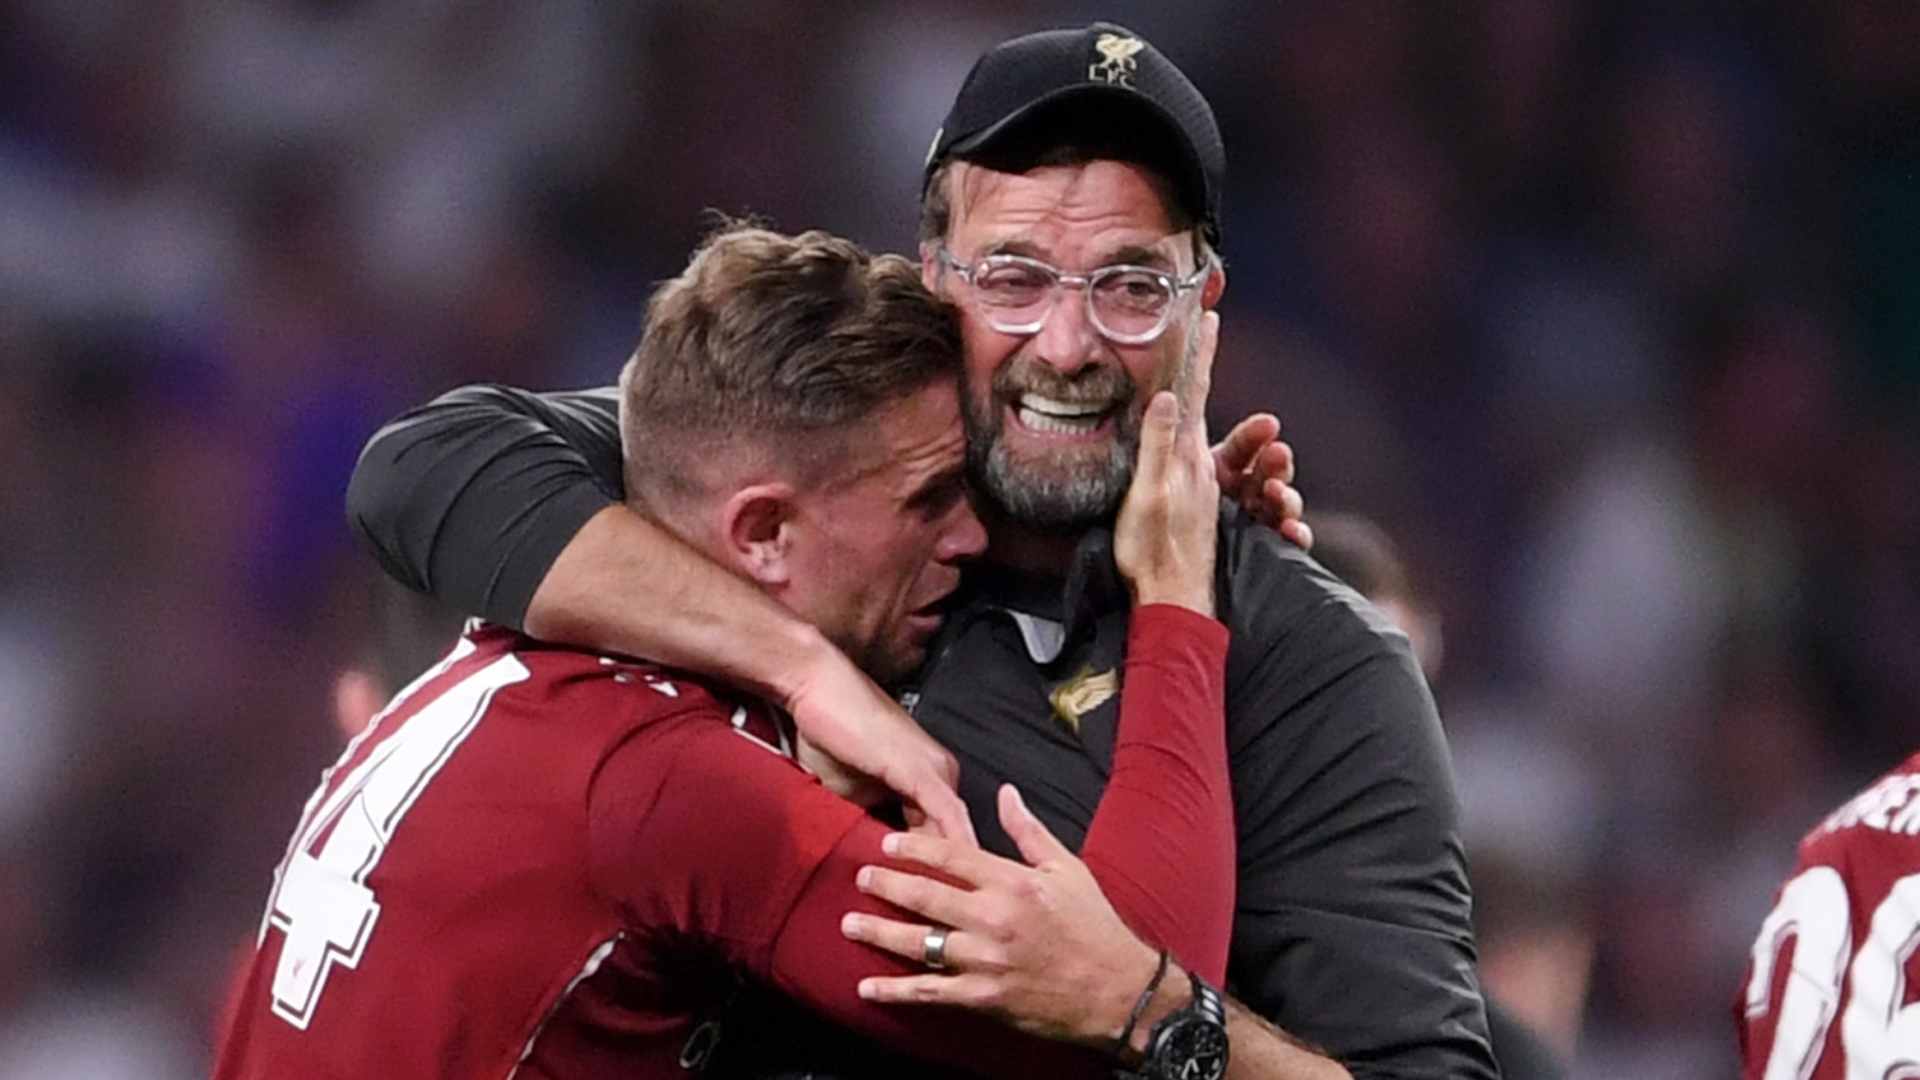 Henderson and Milner were totally average before Klopp arrived at Liverpool - Rangnick